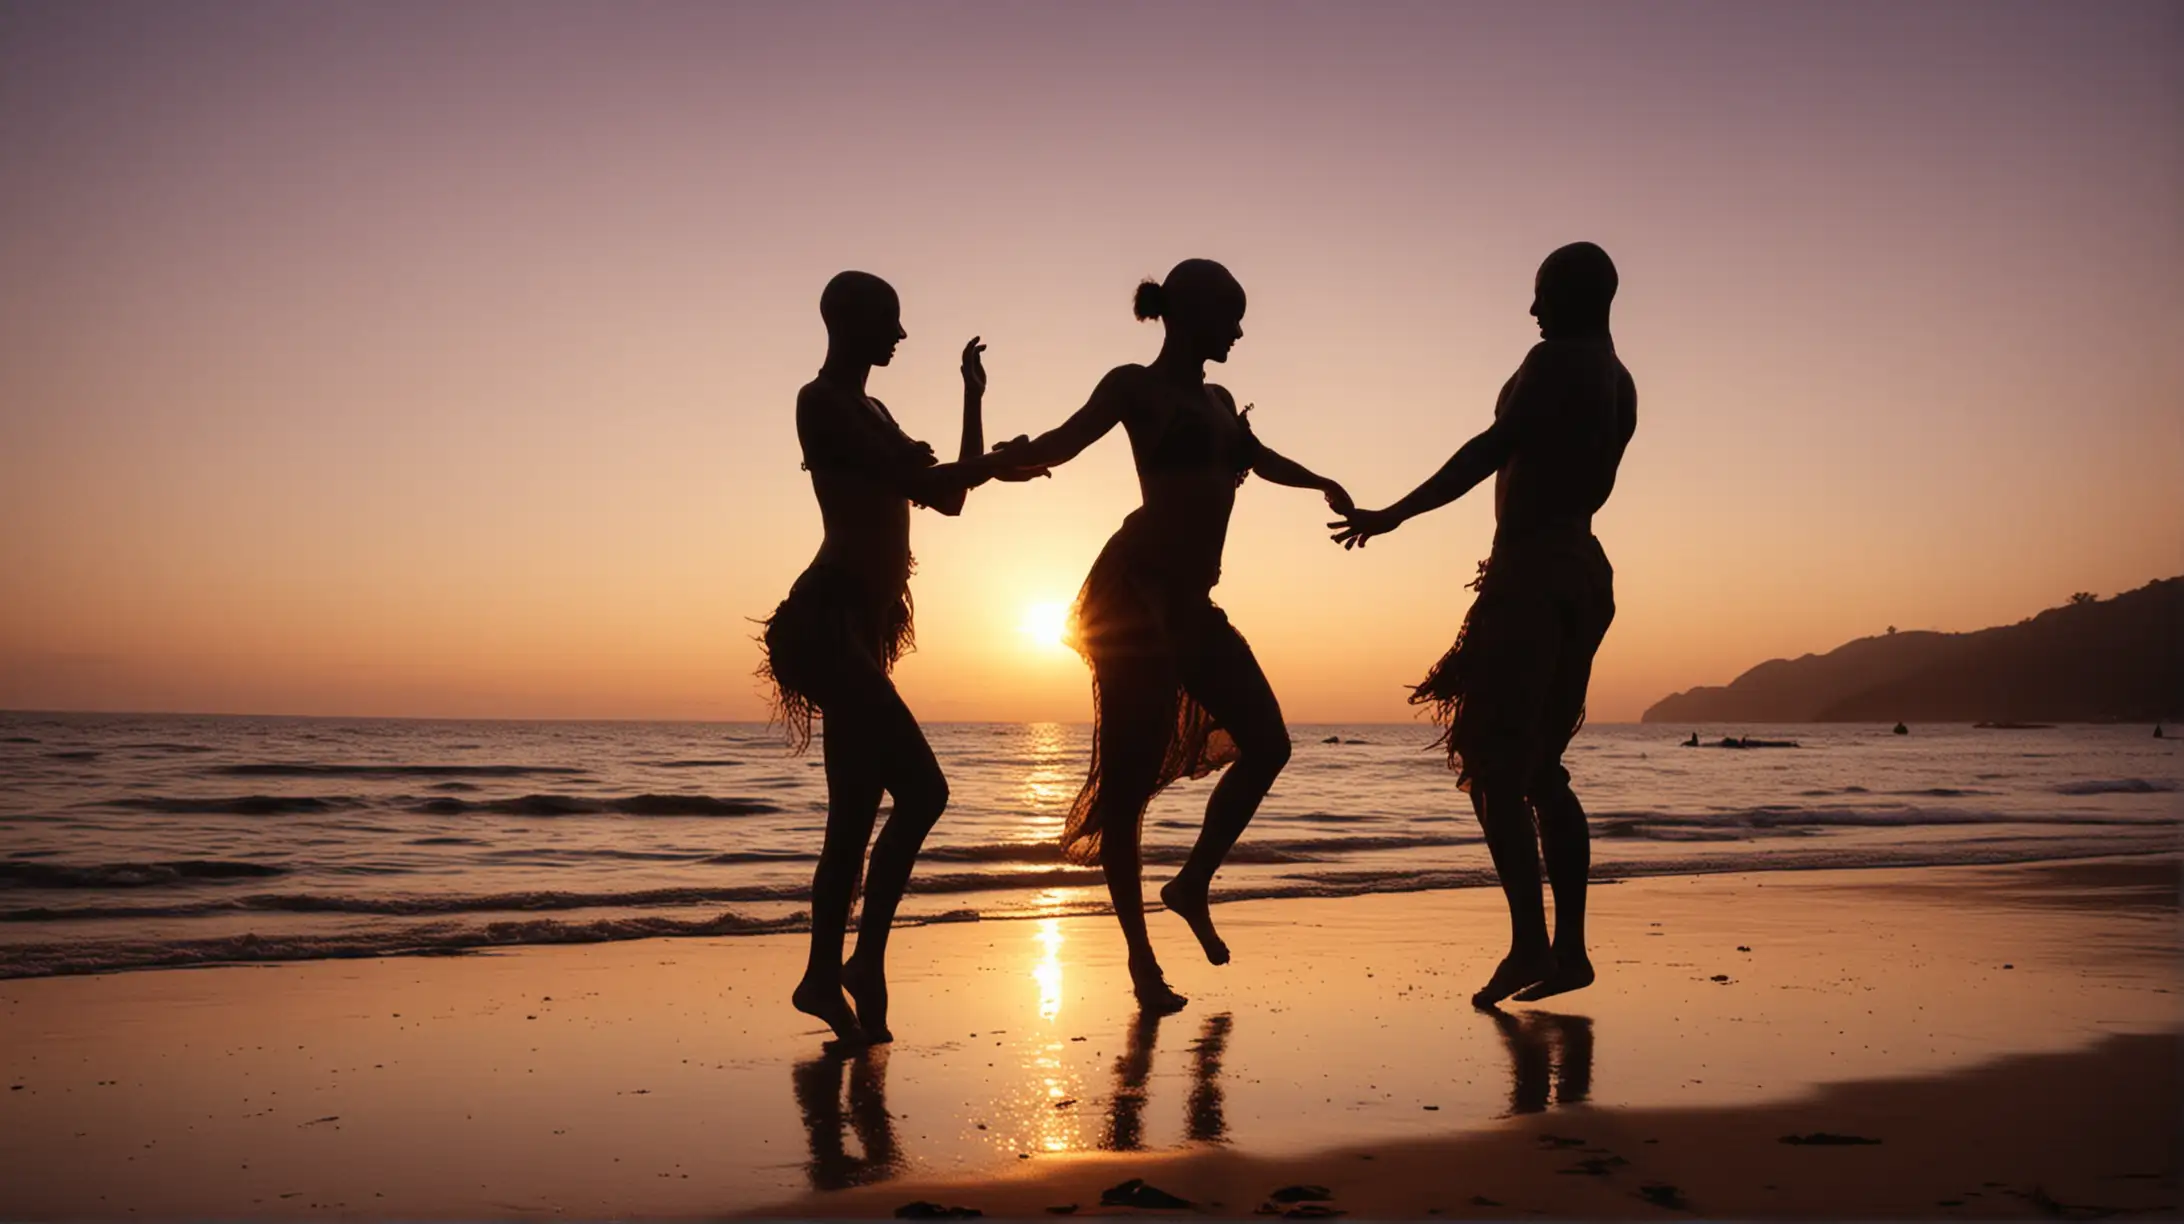 Silhouettes of Man and Women Dancing on Exotic Beach at Dusk